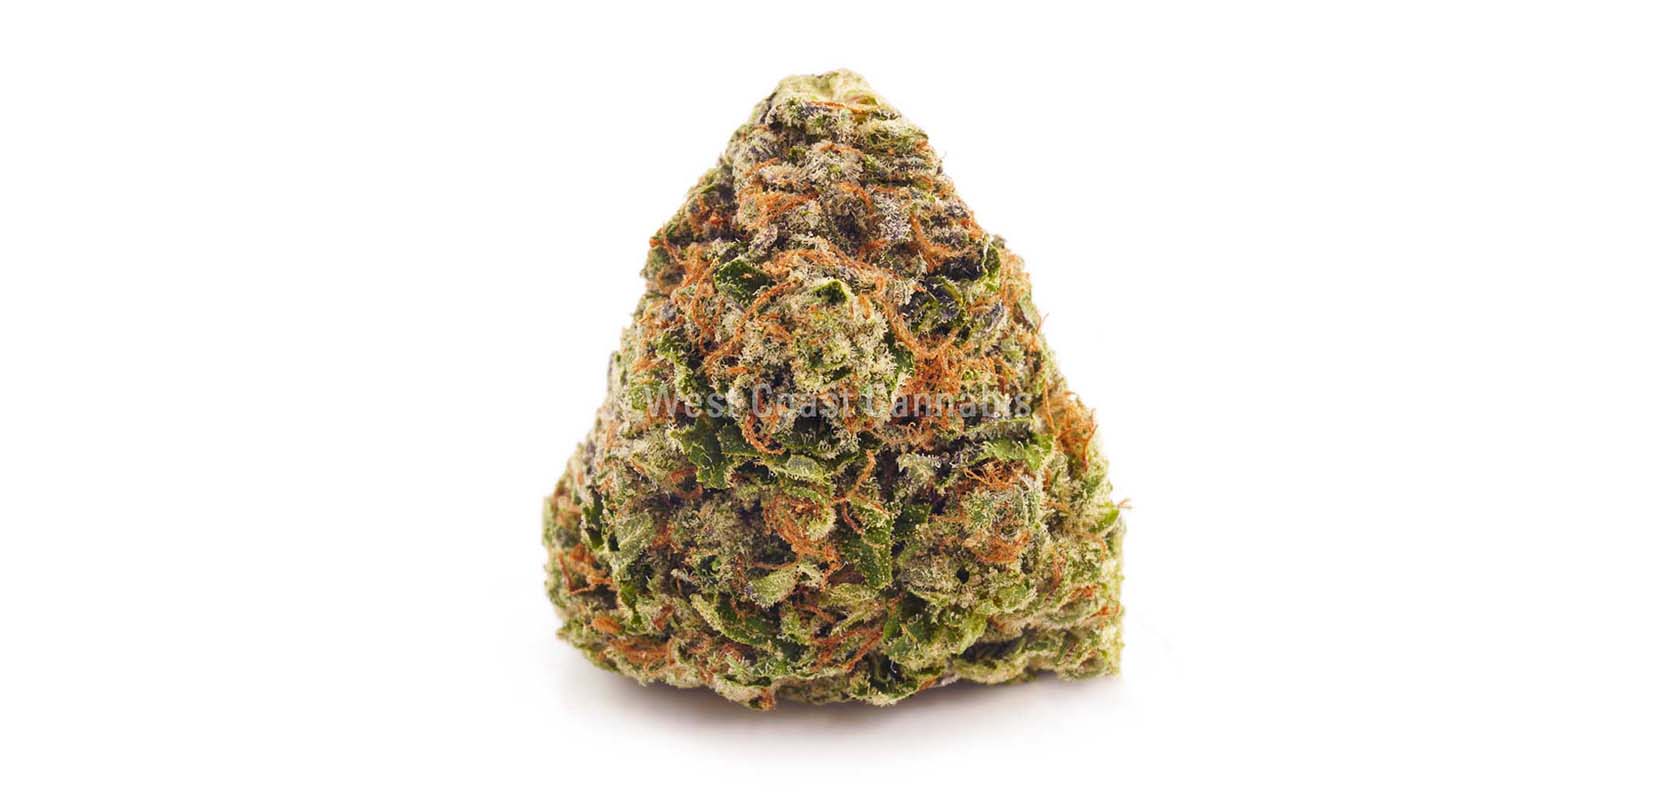 Death Star Weed online Canada. bc cannabis stores. weed vape. sativa strains. weed canada. Dispencary.